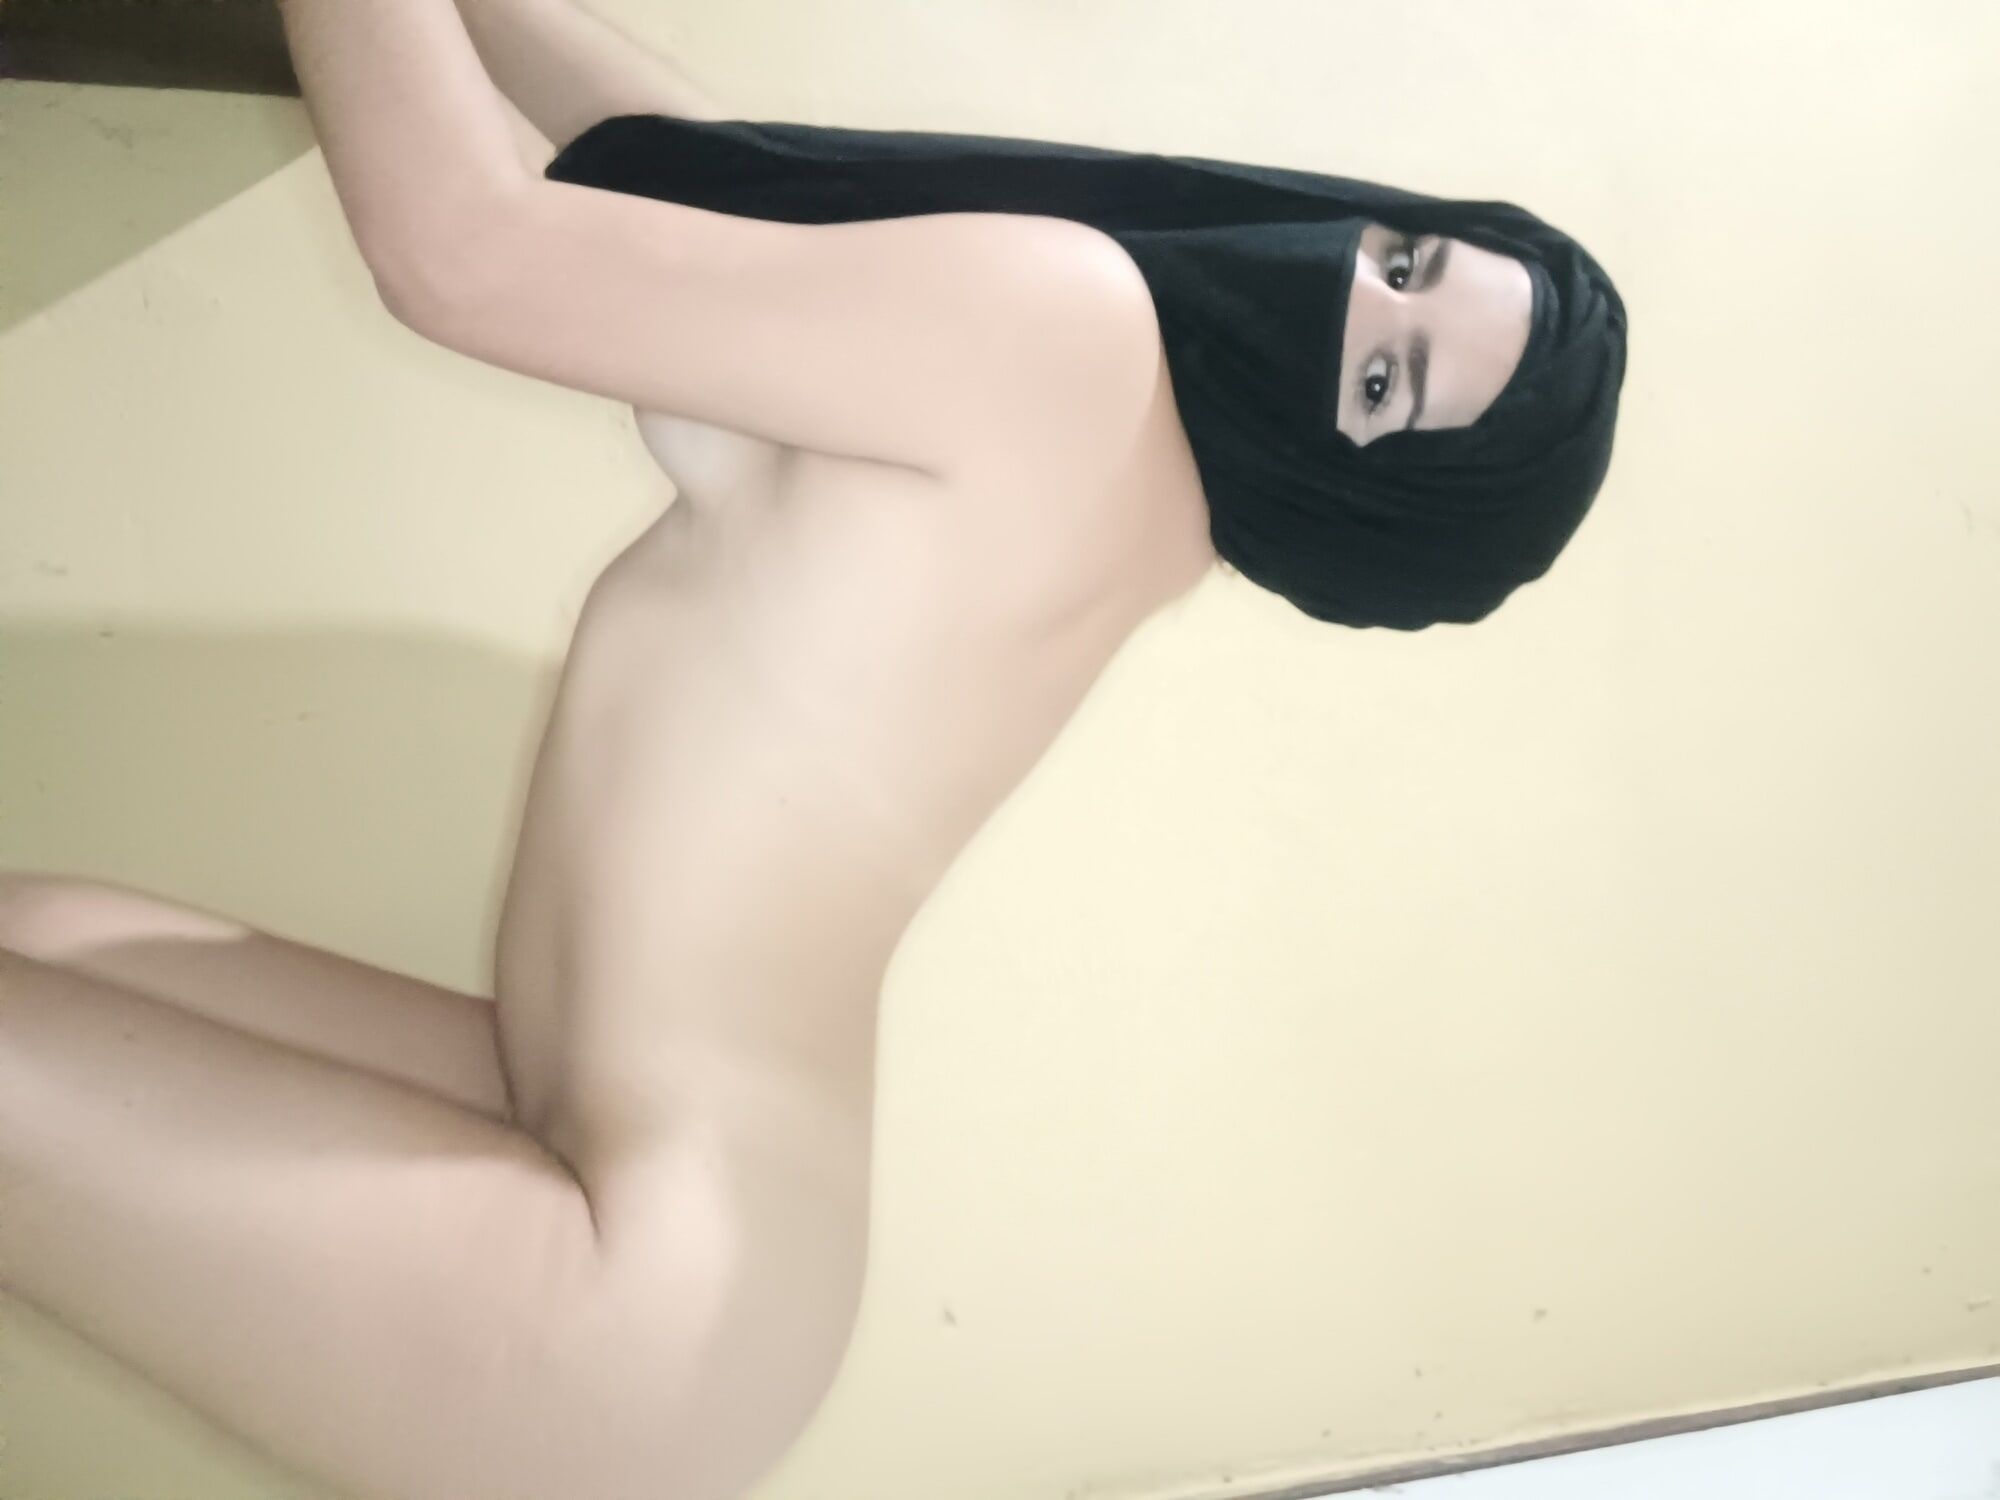 Sexy HOT Horny Arab Showing Ass, Tits And Boobs In HIjab #2